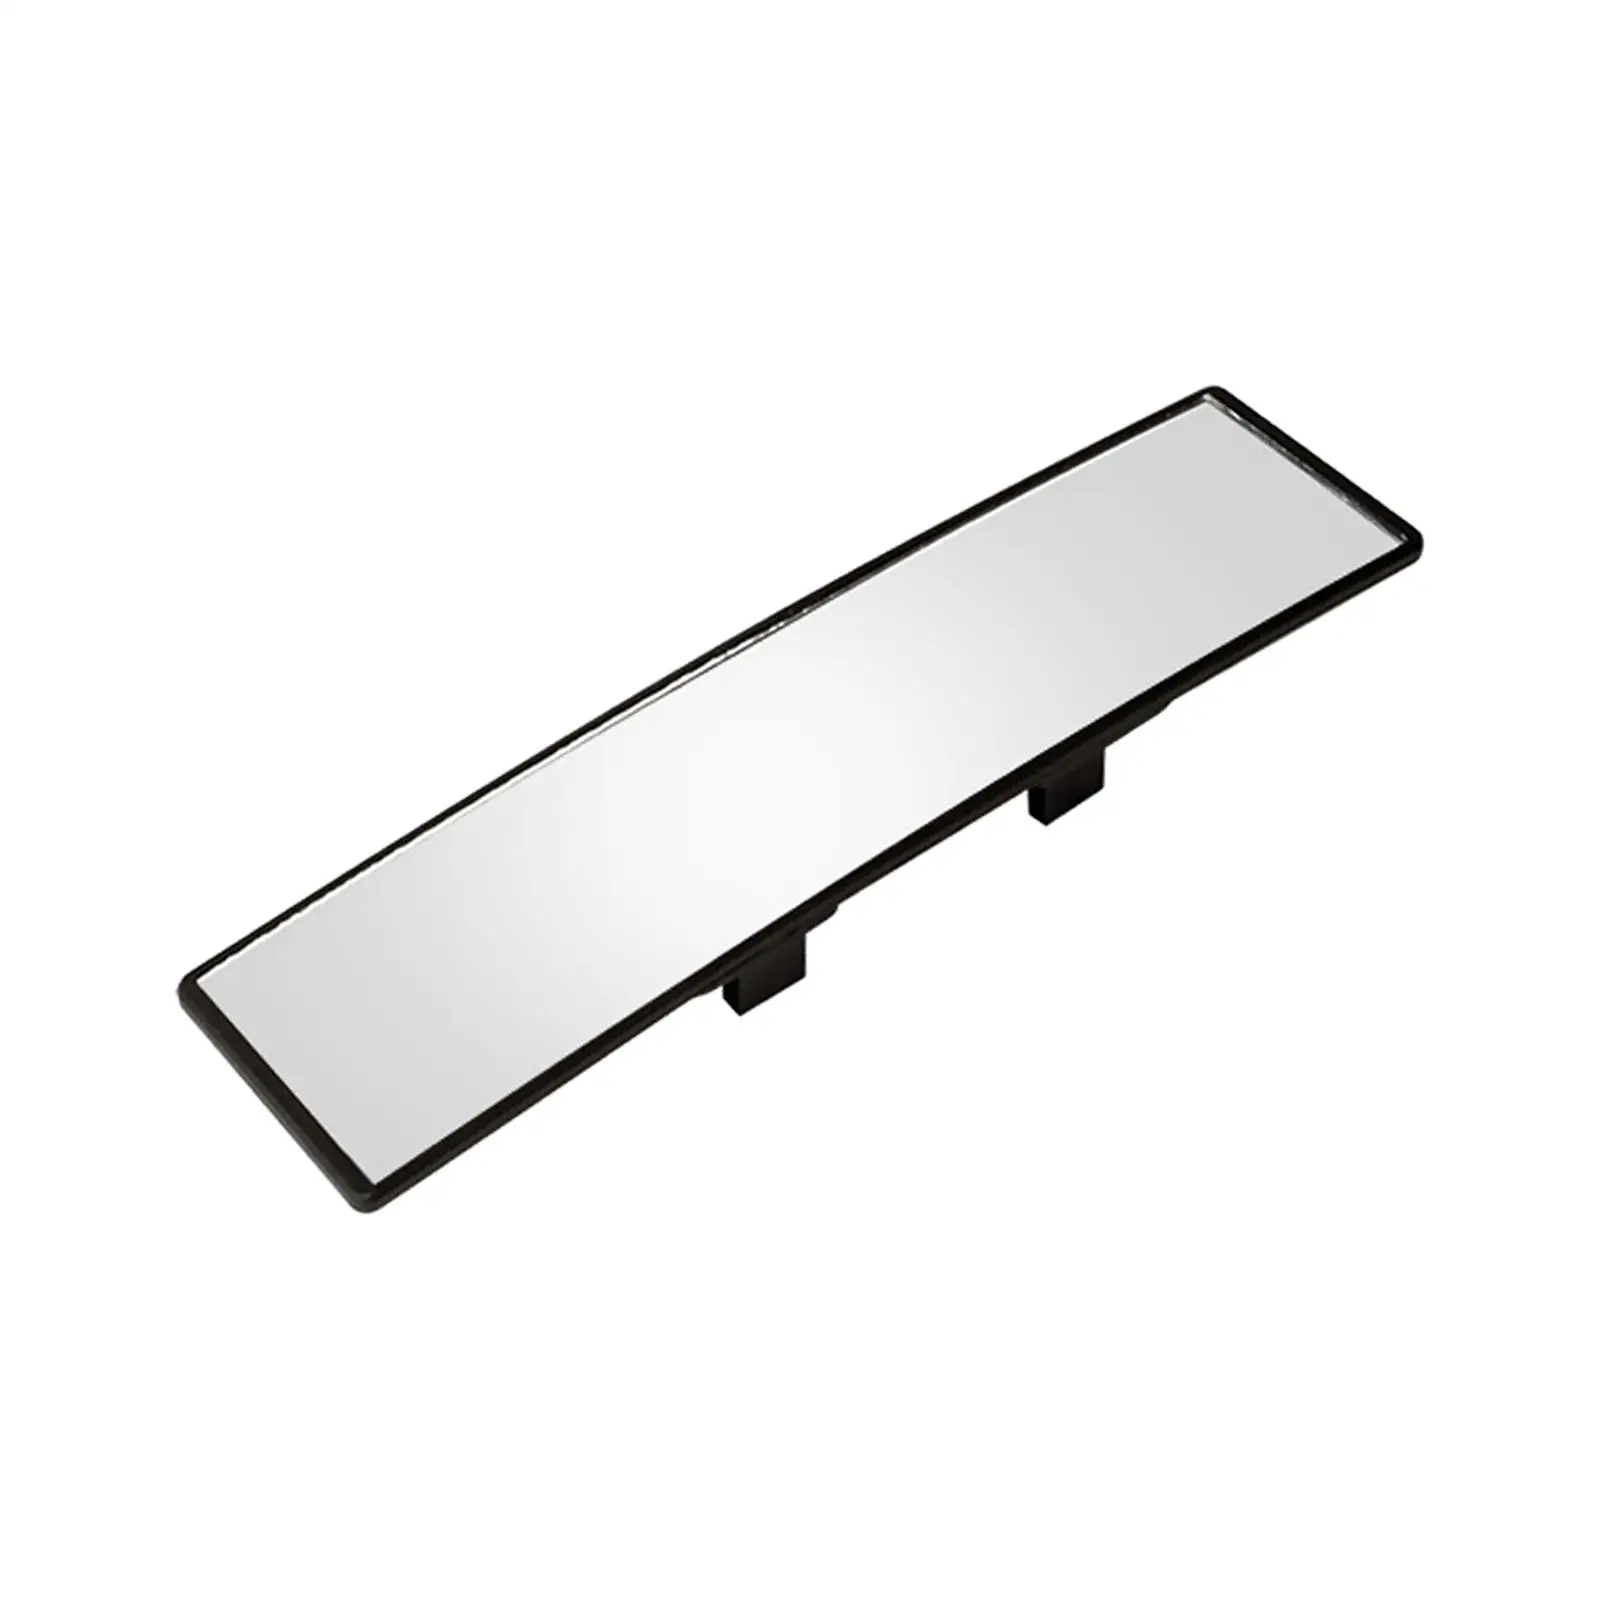 Rear View Mirror Reduces Blind Spot Wide Viewing Range Easy Installation Panoramic Rearview Mirror for Van Trucks Vehicles